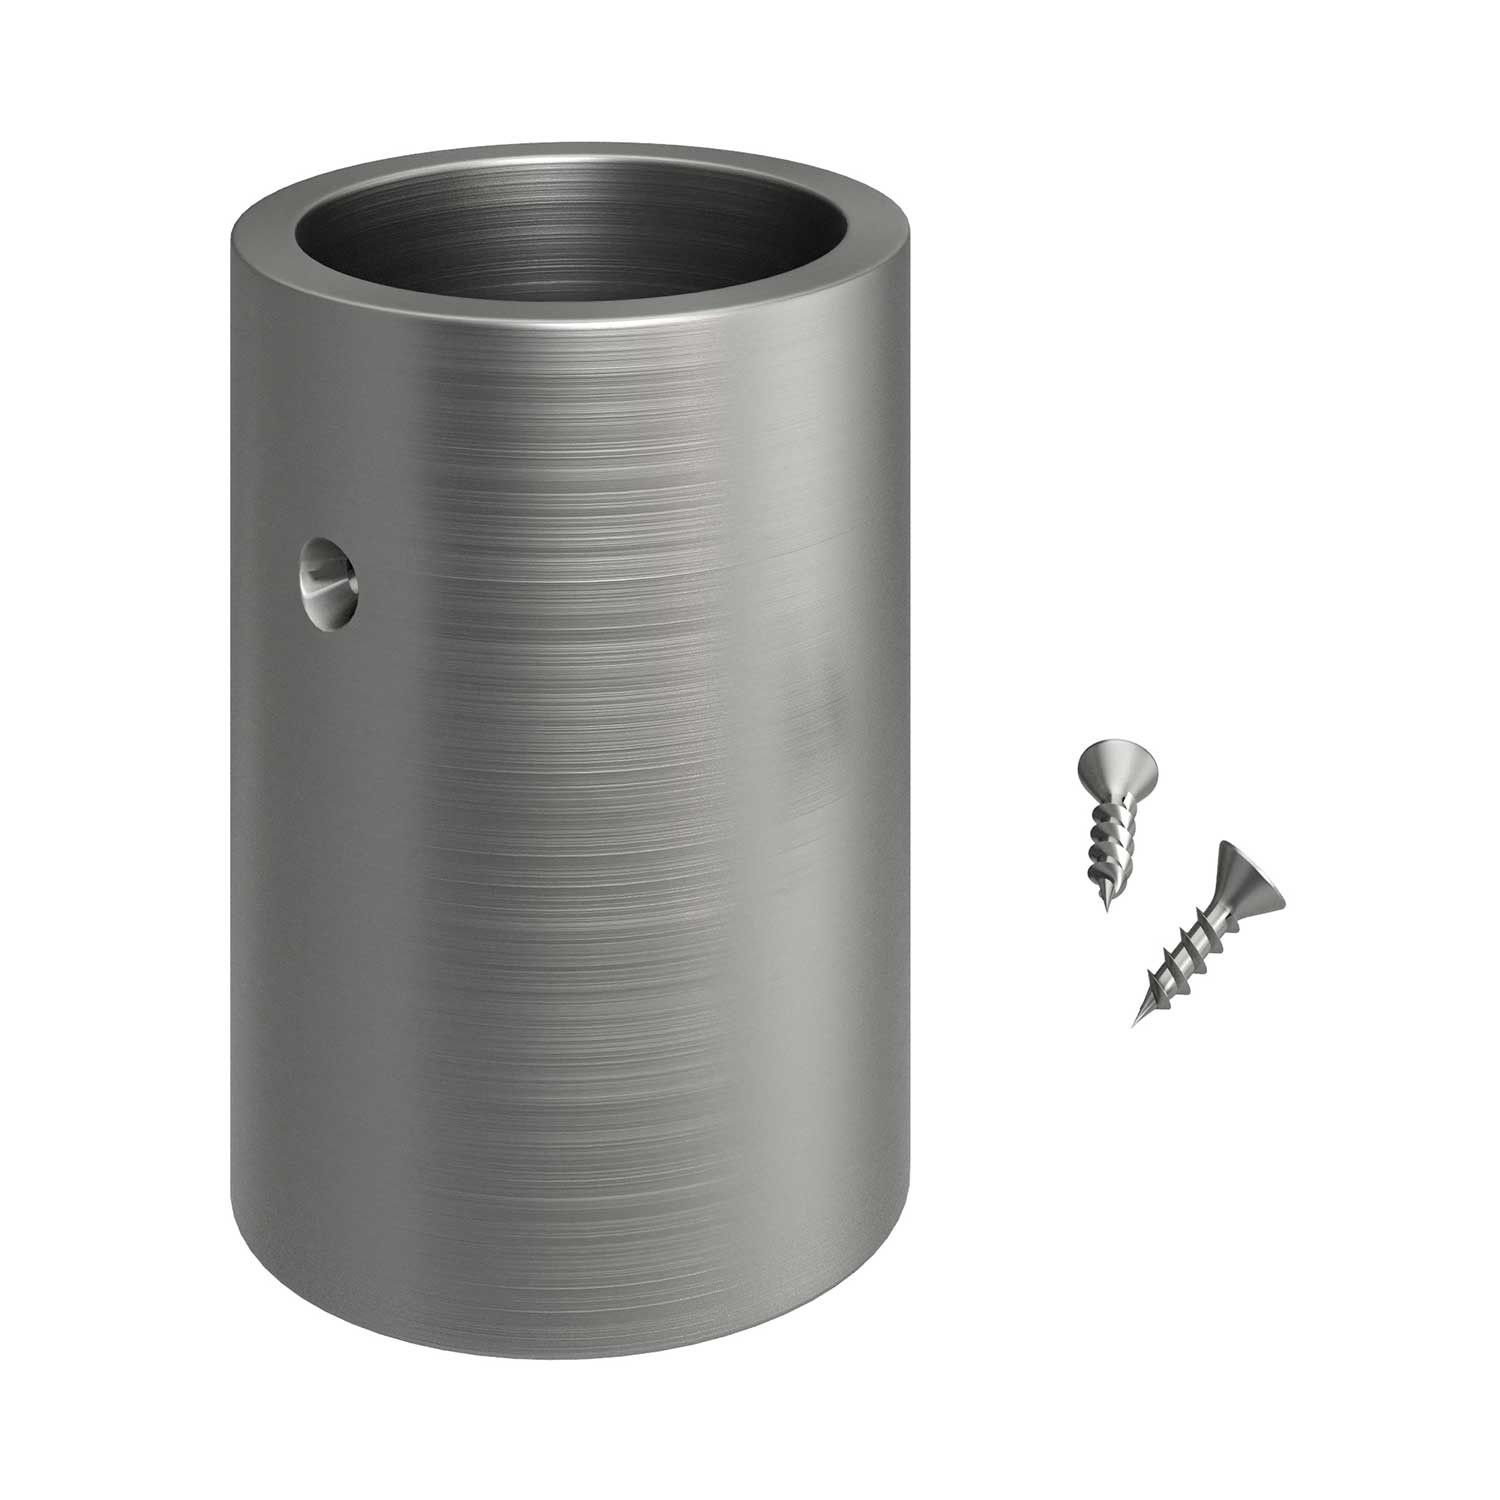 Zinc-plated metal threaded cable terminal for M10 thread Creative-Tube, accessories included